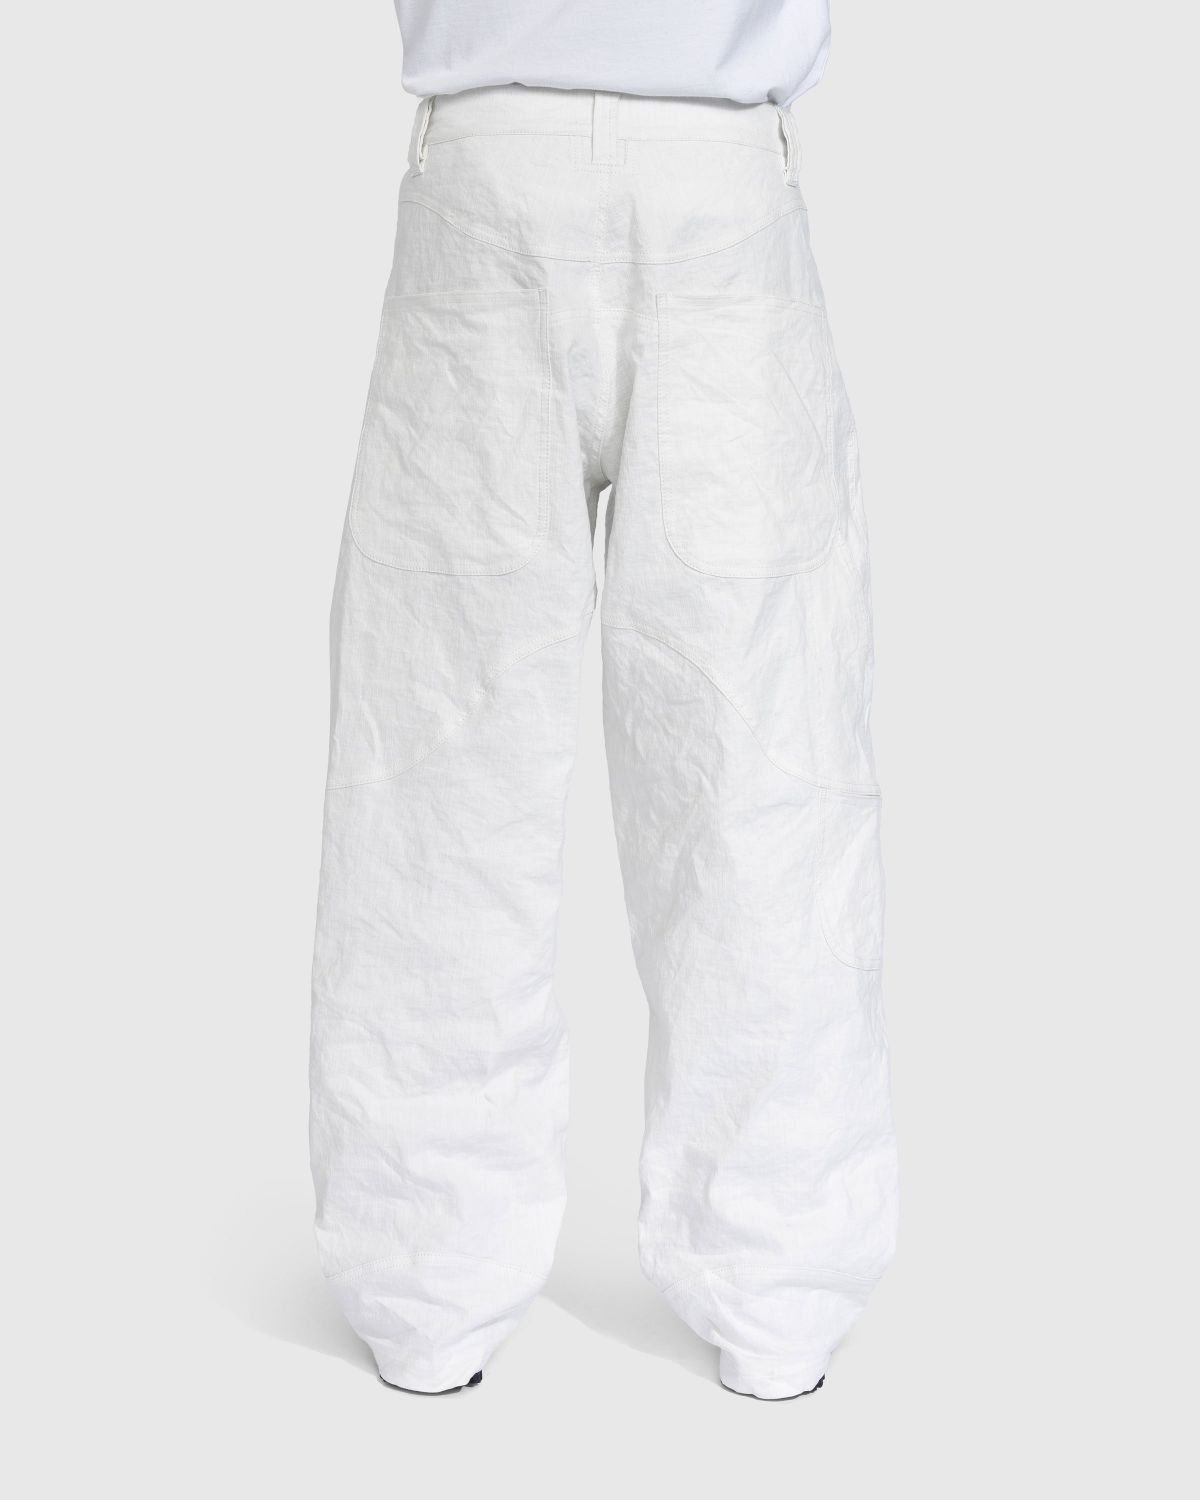 Trussardi – Wrinkled Cotton Trousers White - Pants - White - Image 4